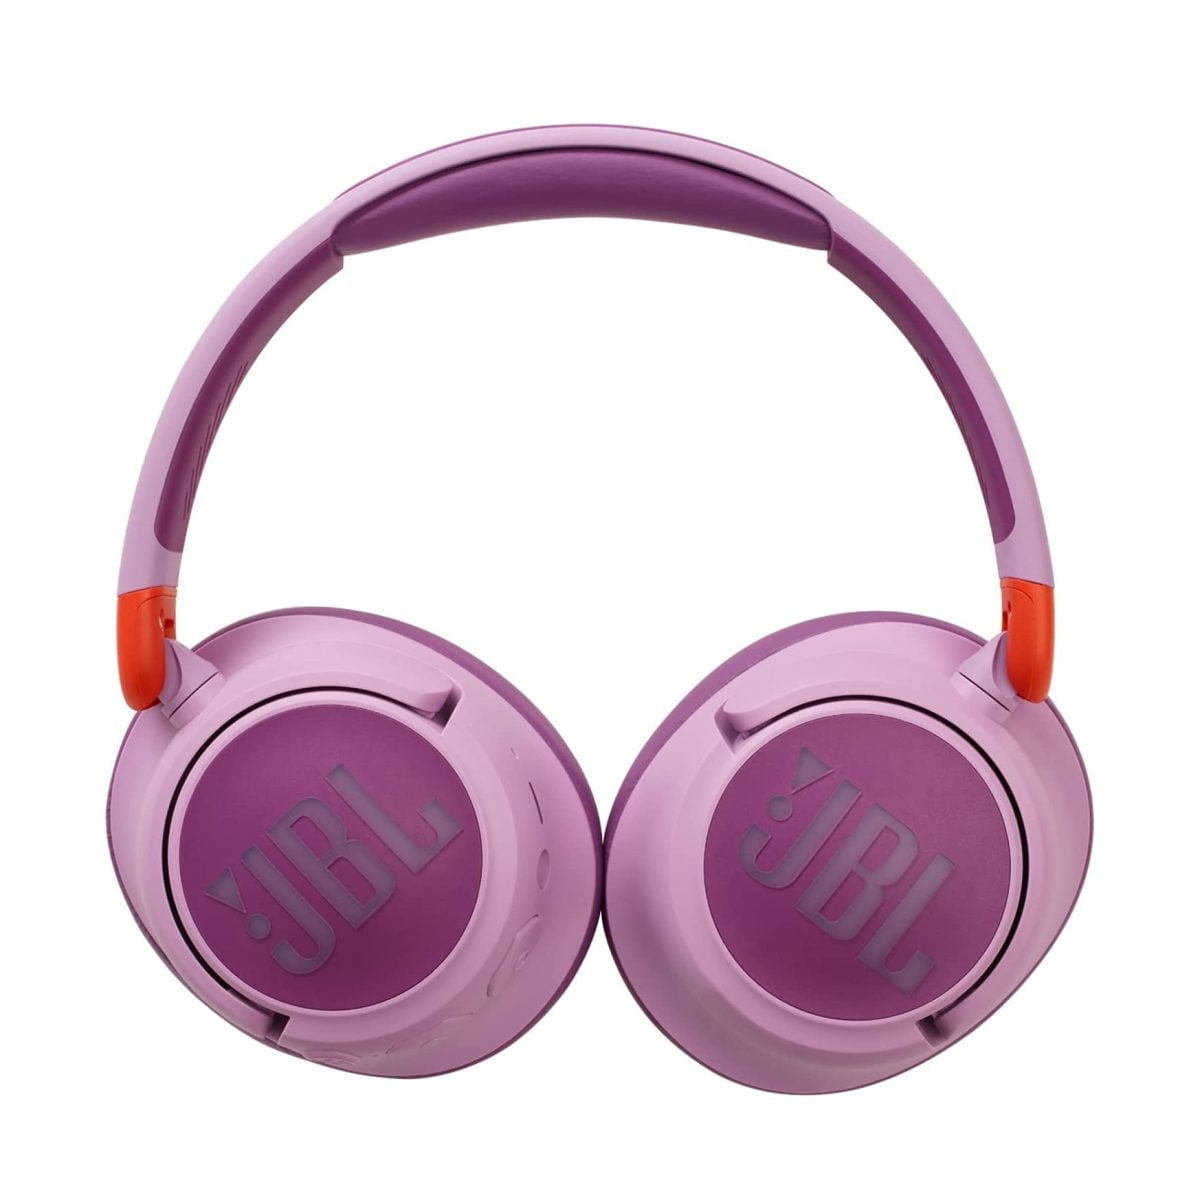 61L3J1Eyazl. Ac Sl1500 Jbl &Lt;H1&Gt;Jbl Jr460Nc On-Ear Wireless Headphones For Kids, Pink&Lt;/H1&Gt;&Lt;Div Class=&Quot;Wpview Wpview-Wrap&Quot; Data-Wpview-Text=&Quot;Https%3A%2F%2Fwww.youtube.com%2Fwatch%3Fv%3Dmdaicwkv4Pg&Quot; Data-Wpview-Type=&Quot;Embedurl&Quot;&Gt;&Lt;Span Class=&Quot;Mce-Shim&Quot;&Gt;&Lt;/Span&Gt;&Lt;Span Class=&Quot;Wpview-End&Quot;&Gt;&Lt;/Span&Gt;&Lt;/Div&Gt;&Lt;P&Gt;Quality Sound Has No Age, But You Want To Be Sure Your Kids Are Safe While Having Fun. With A Maximum Volume Set Under 85Db, They’re Free To Enjoy Jbl Quality Sound, Safely. Shut Out All That Noise And Distraction With Active Noise Cancelling. Your Kids Can Stay Focused Whether They’re Listening To Music, Enjoying Their Favorite Show Or Learning Online. Help Your Kids Stay Connected To The World With The Built-In Mic. They Can Chat Easily With Friends And Family During Downtime, Or Teachers While They’re Busy Learning.&Lt;/P&Gt; Jbl Headphone Jbl Jr460Nc Wireless Over-Ear Noise Cancelling Kids Headphones - Pink